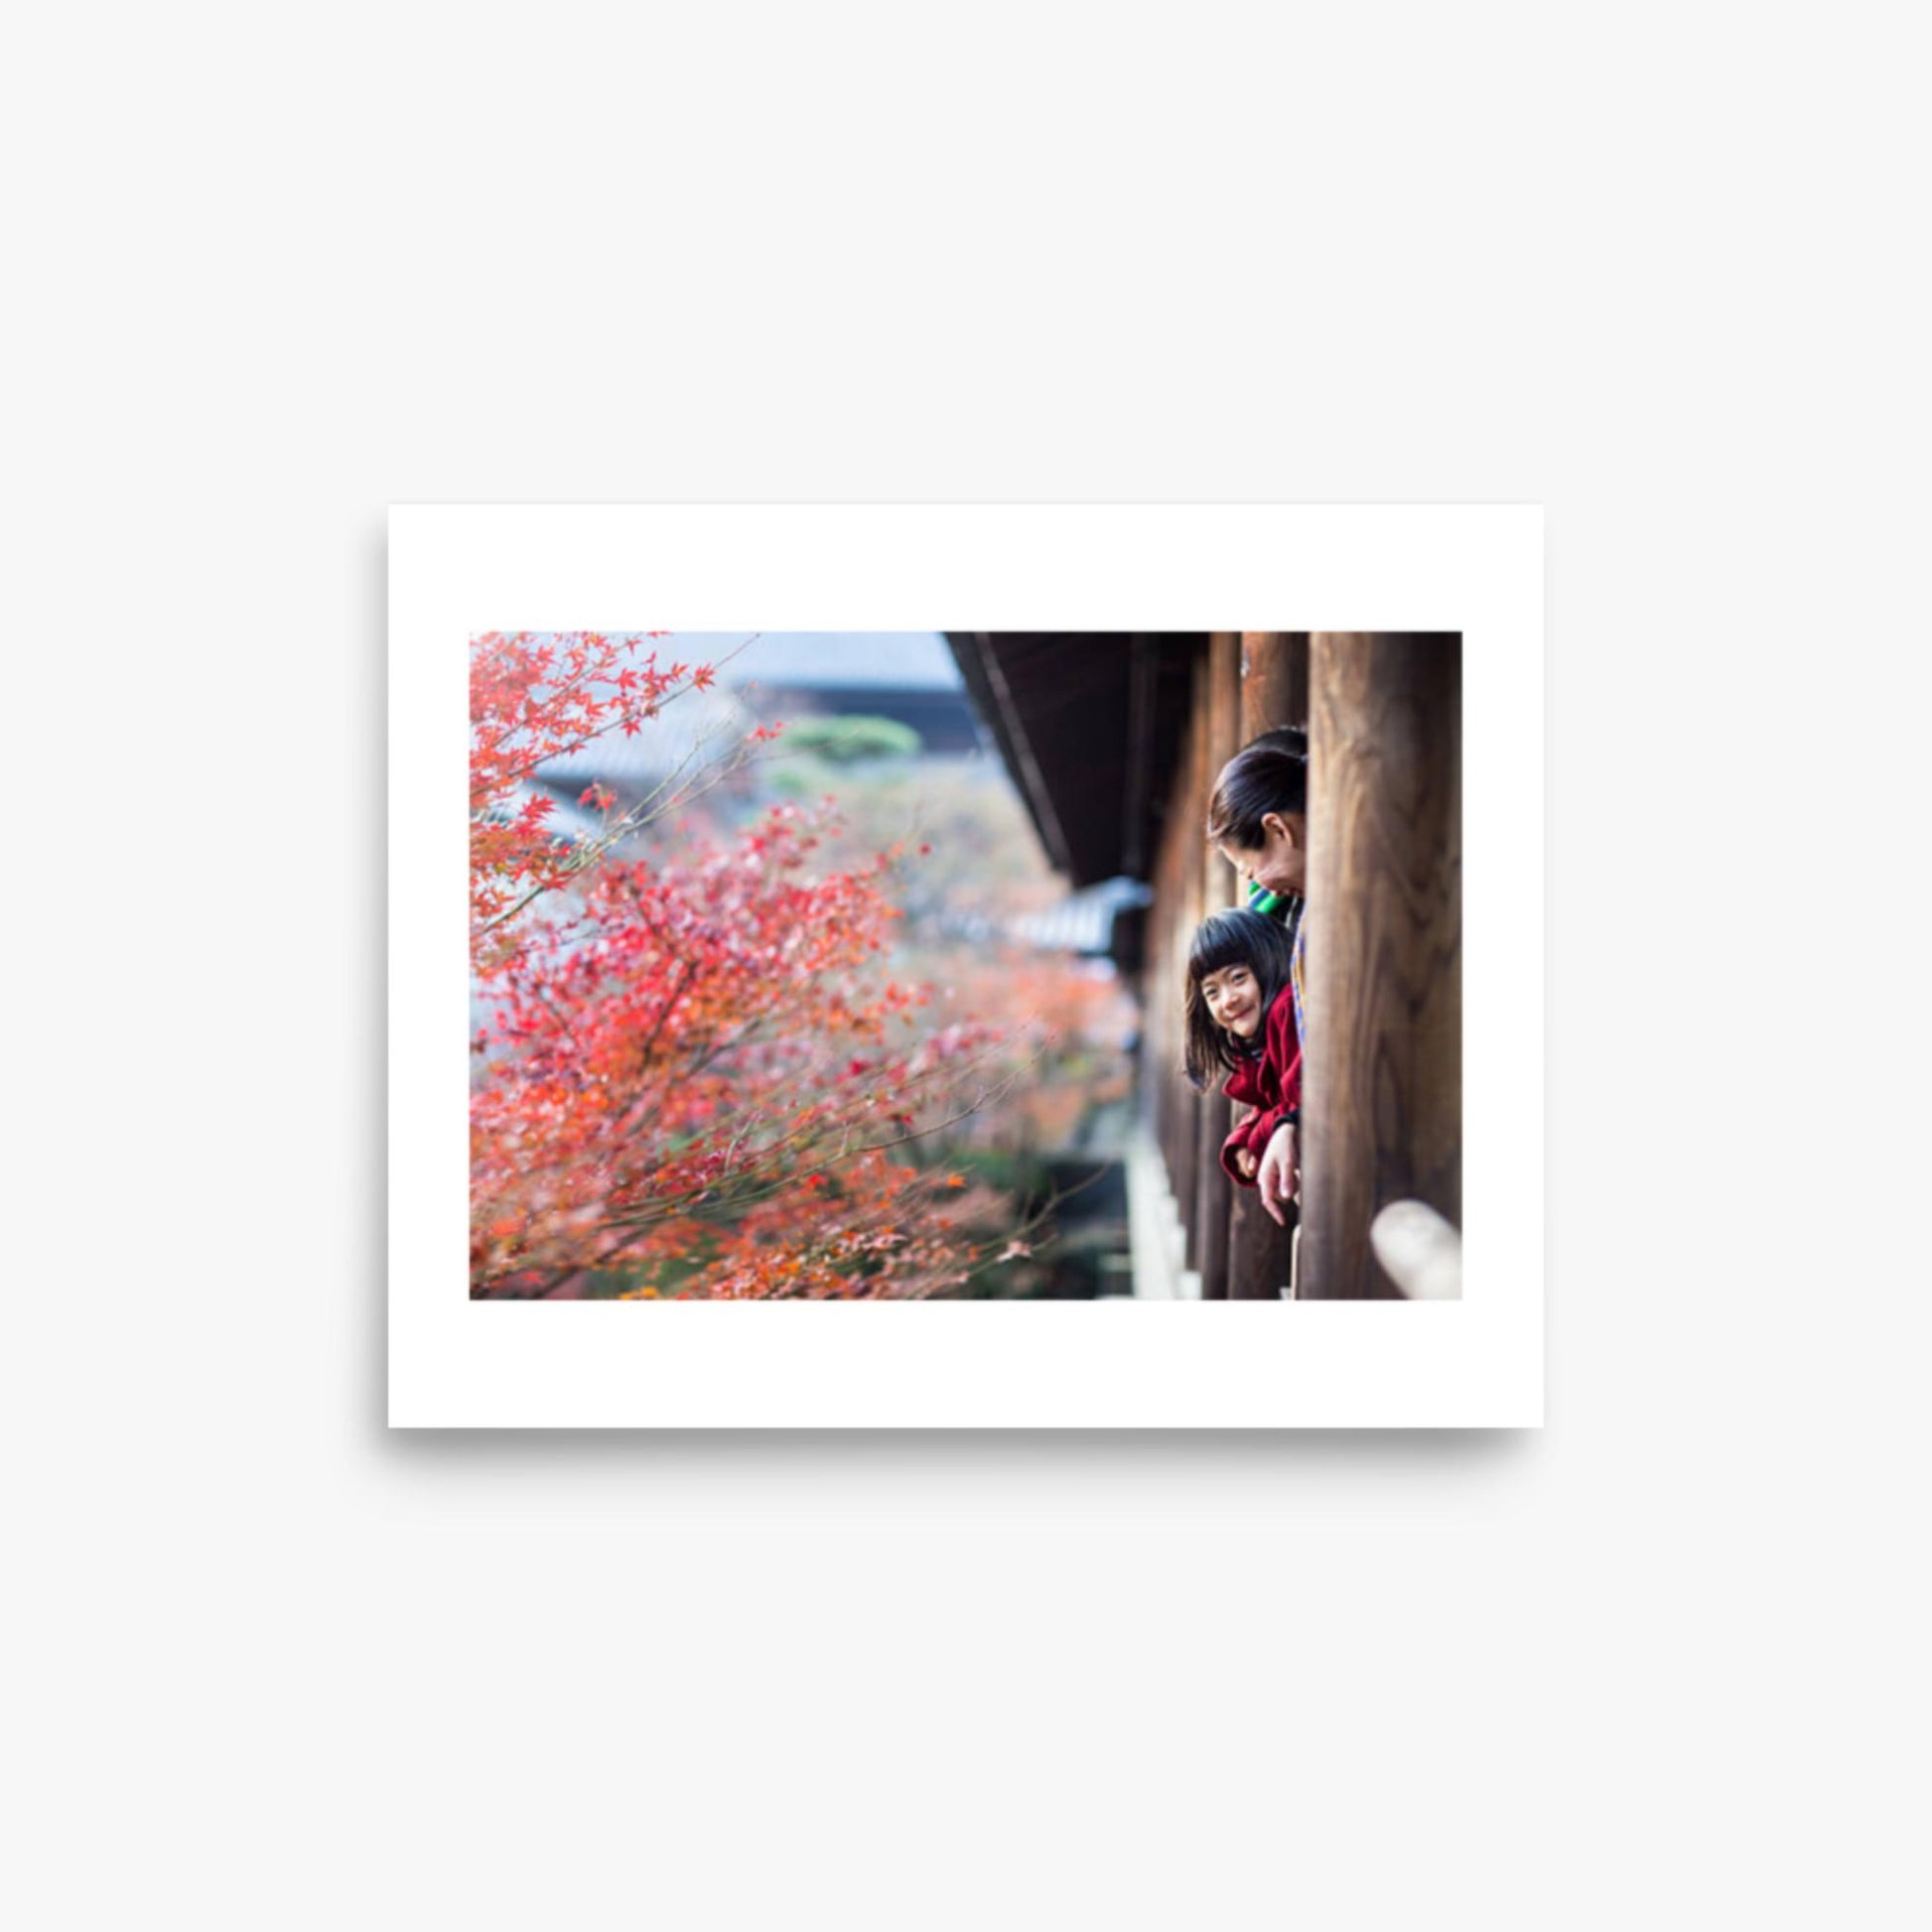 Father, mother and daughter at a temple enjoying autumn leaves 8x10 in Poster